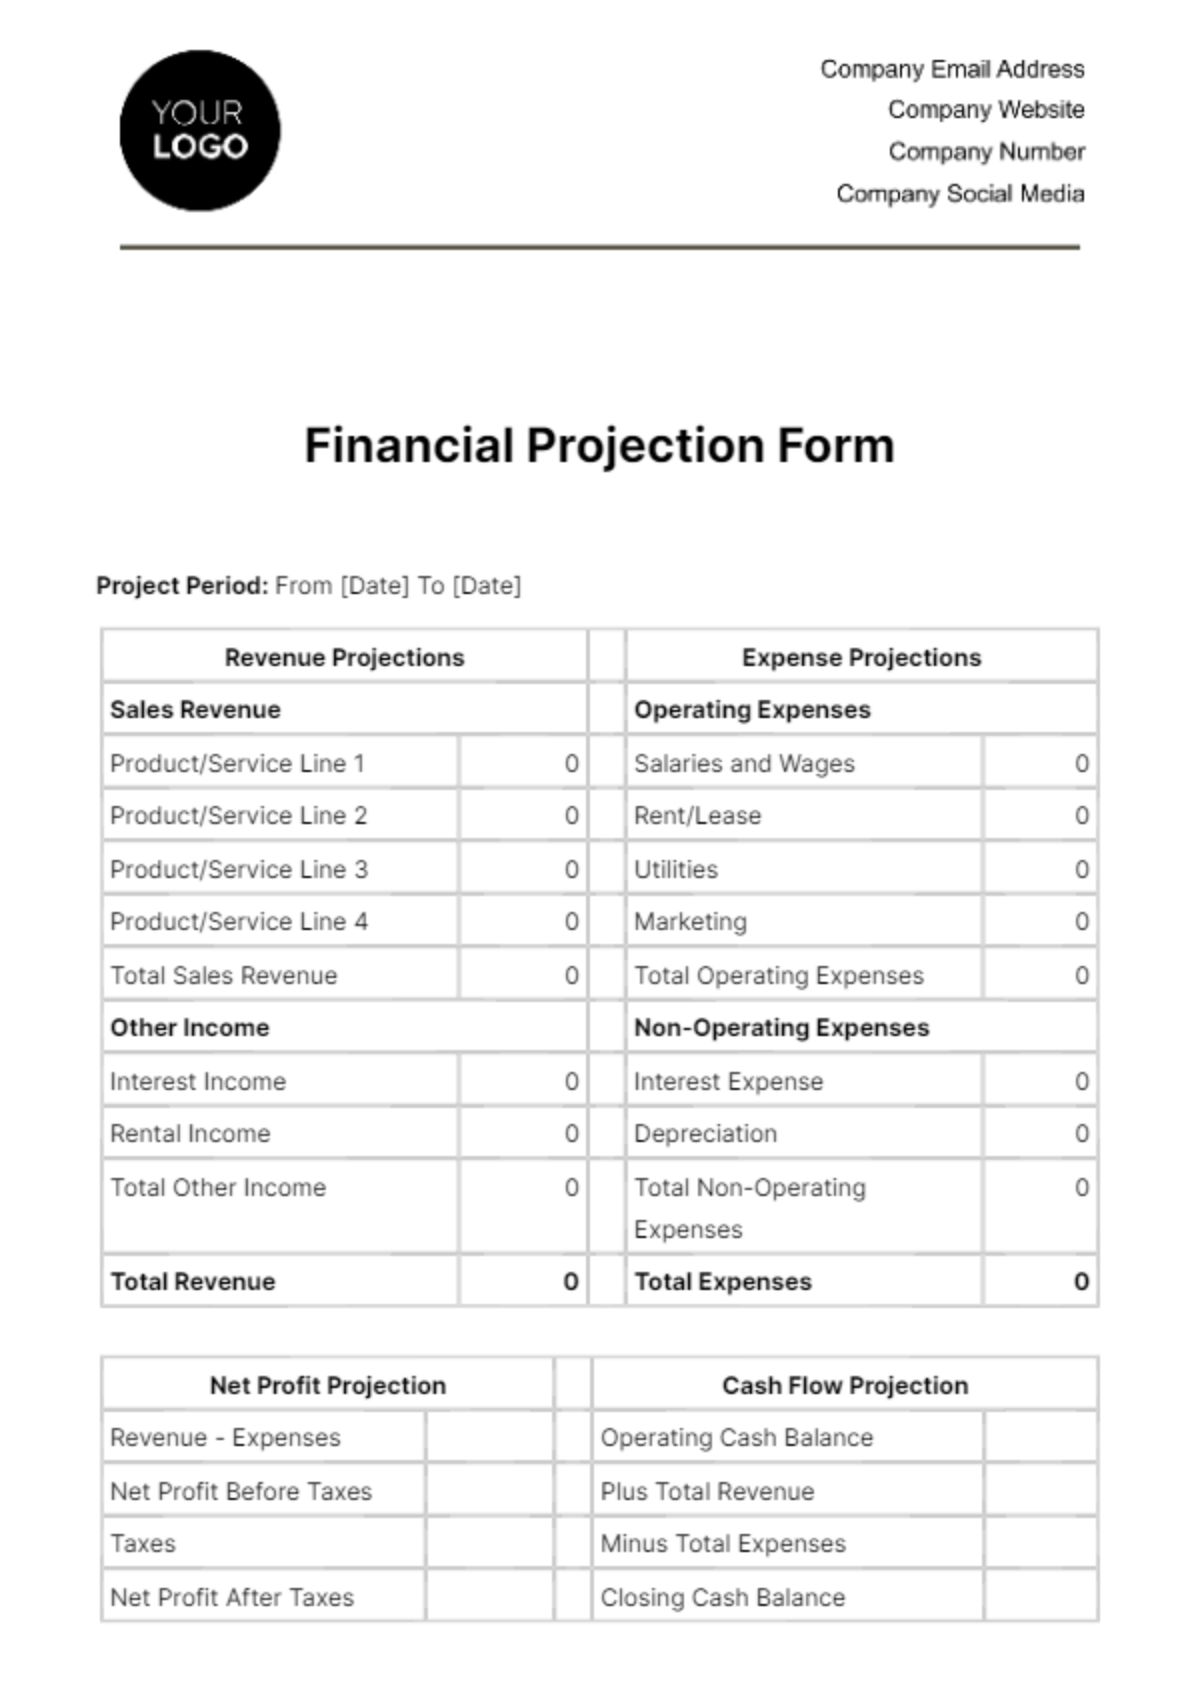 Free Financial Projection Form Template